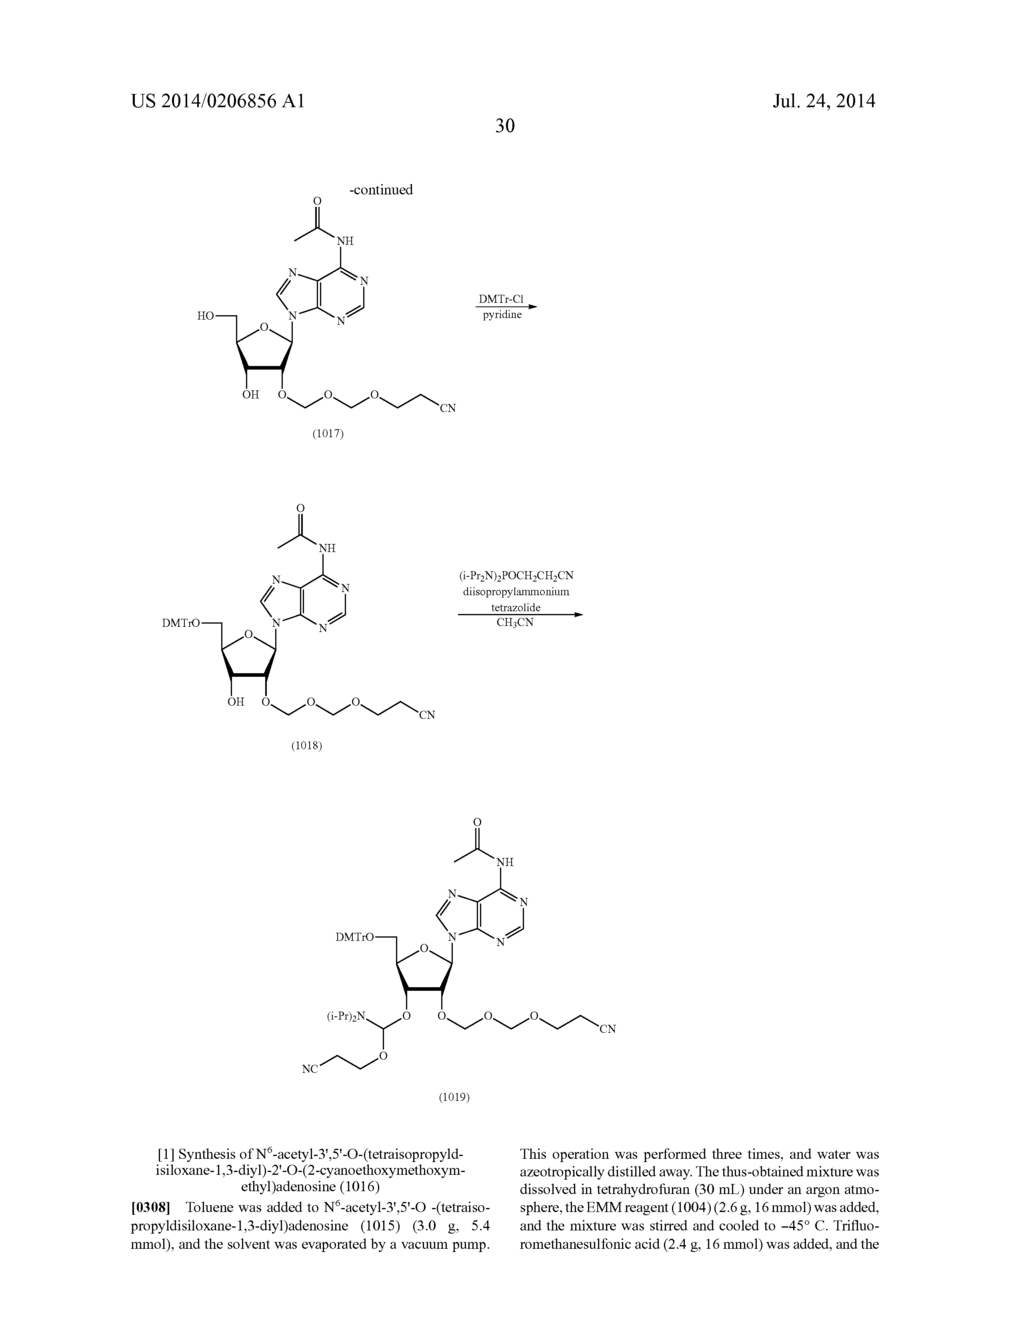 GLYCOSIDE COMPOUND, METHOD FOR PRODUCING THIOETHER, ETHER, METHOD FOR     PRODUCING ETHER, METHOD FOR PRODUCING GLYCOSIDE COMPOUND, METHOD FOR     PRODUCING NUCLEIC ACID - diagram, schematic, and image 34